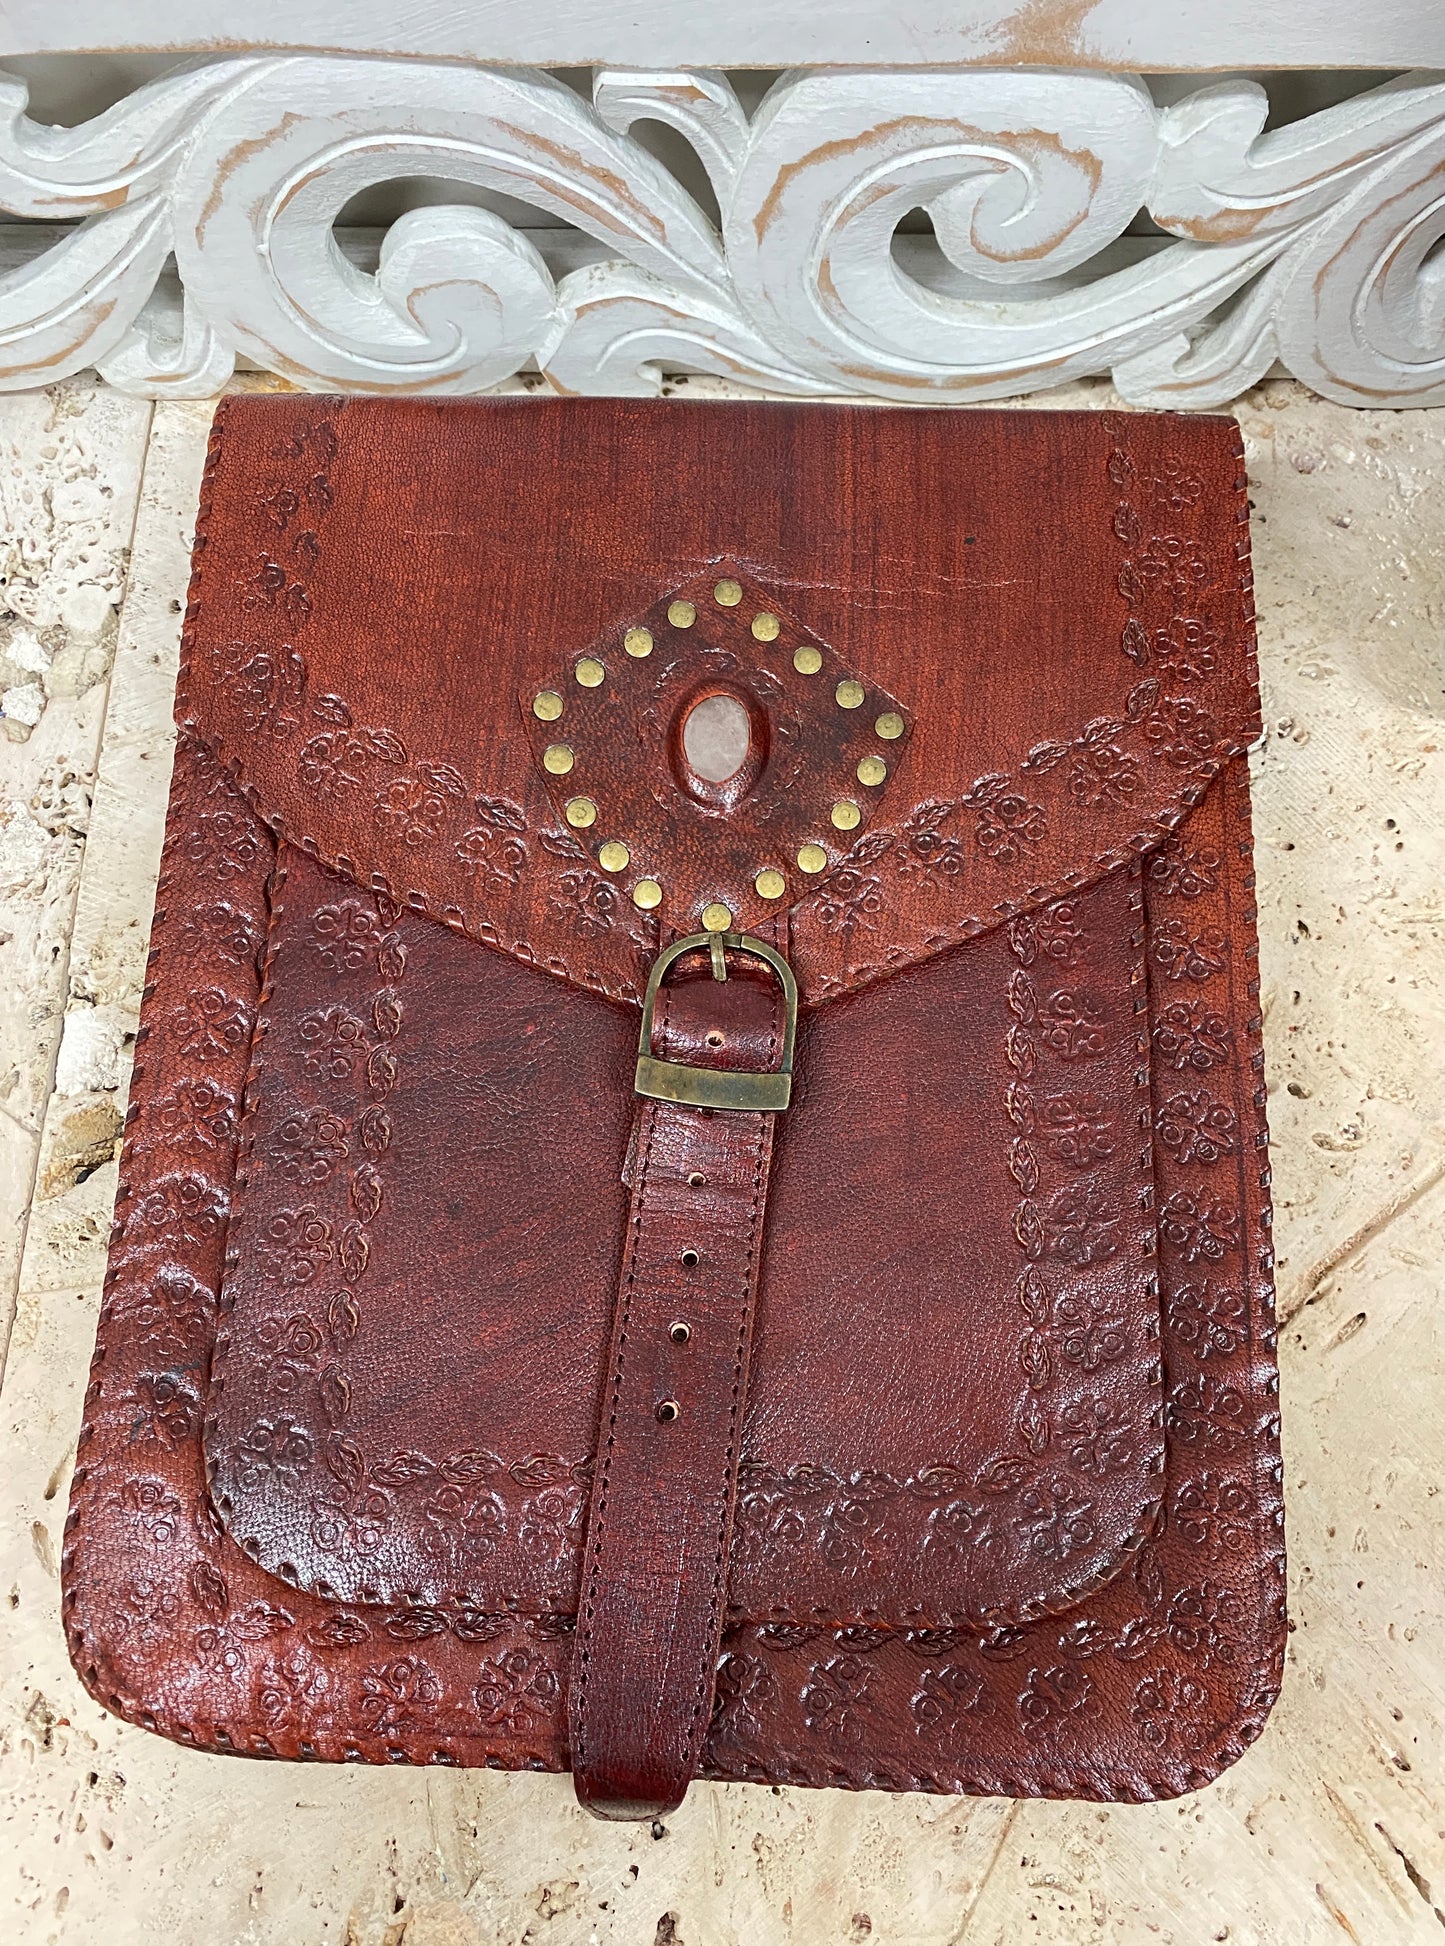 Hand Made Camel Leather purse with Gemstones 4 Pockets! 11" x 9"